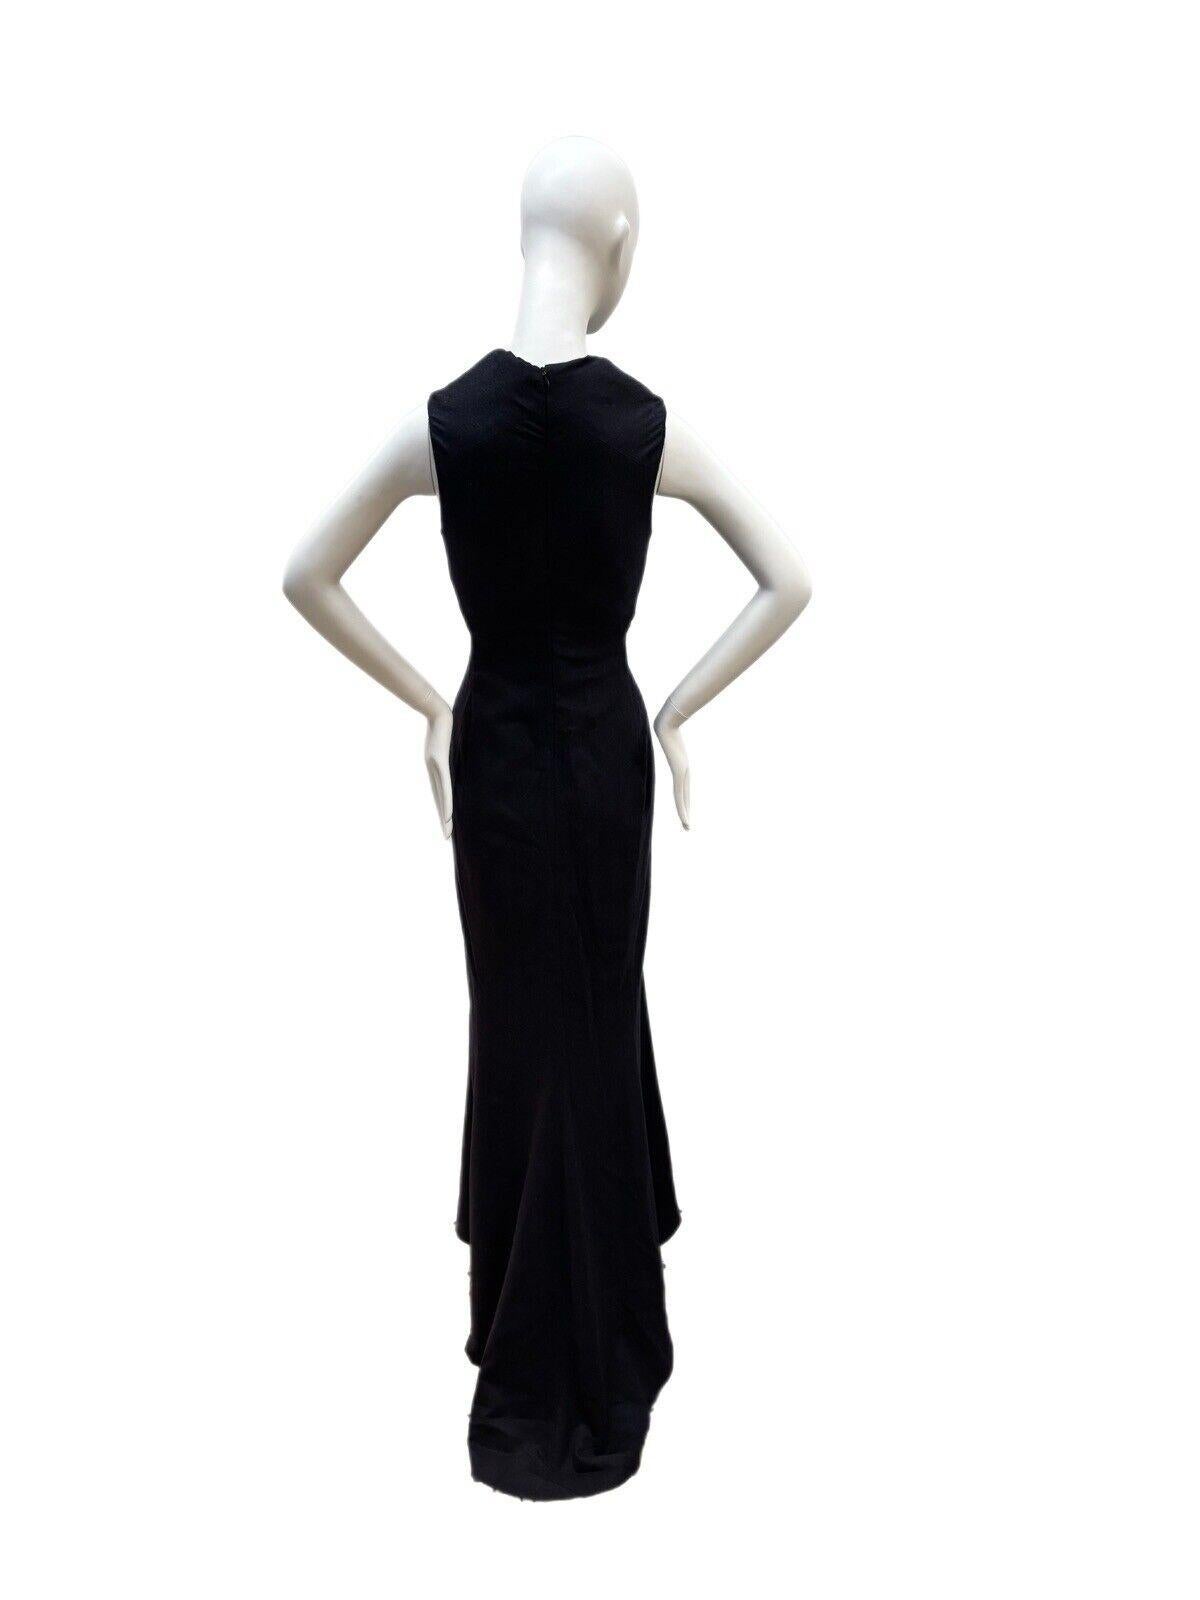 CALVIN KLEIN COLLECTION 2007 vintage runway evening gown maxi dress For Sale 2